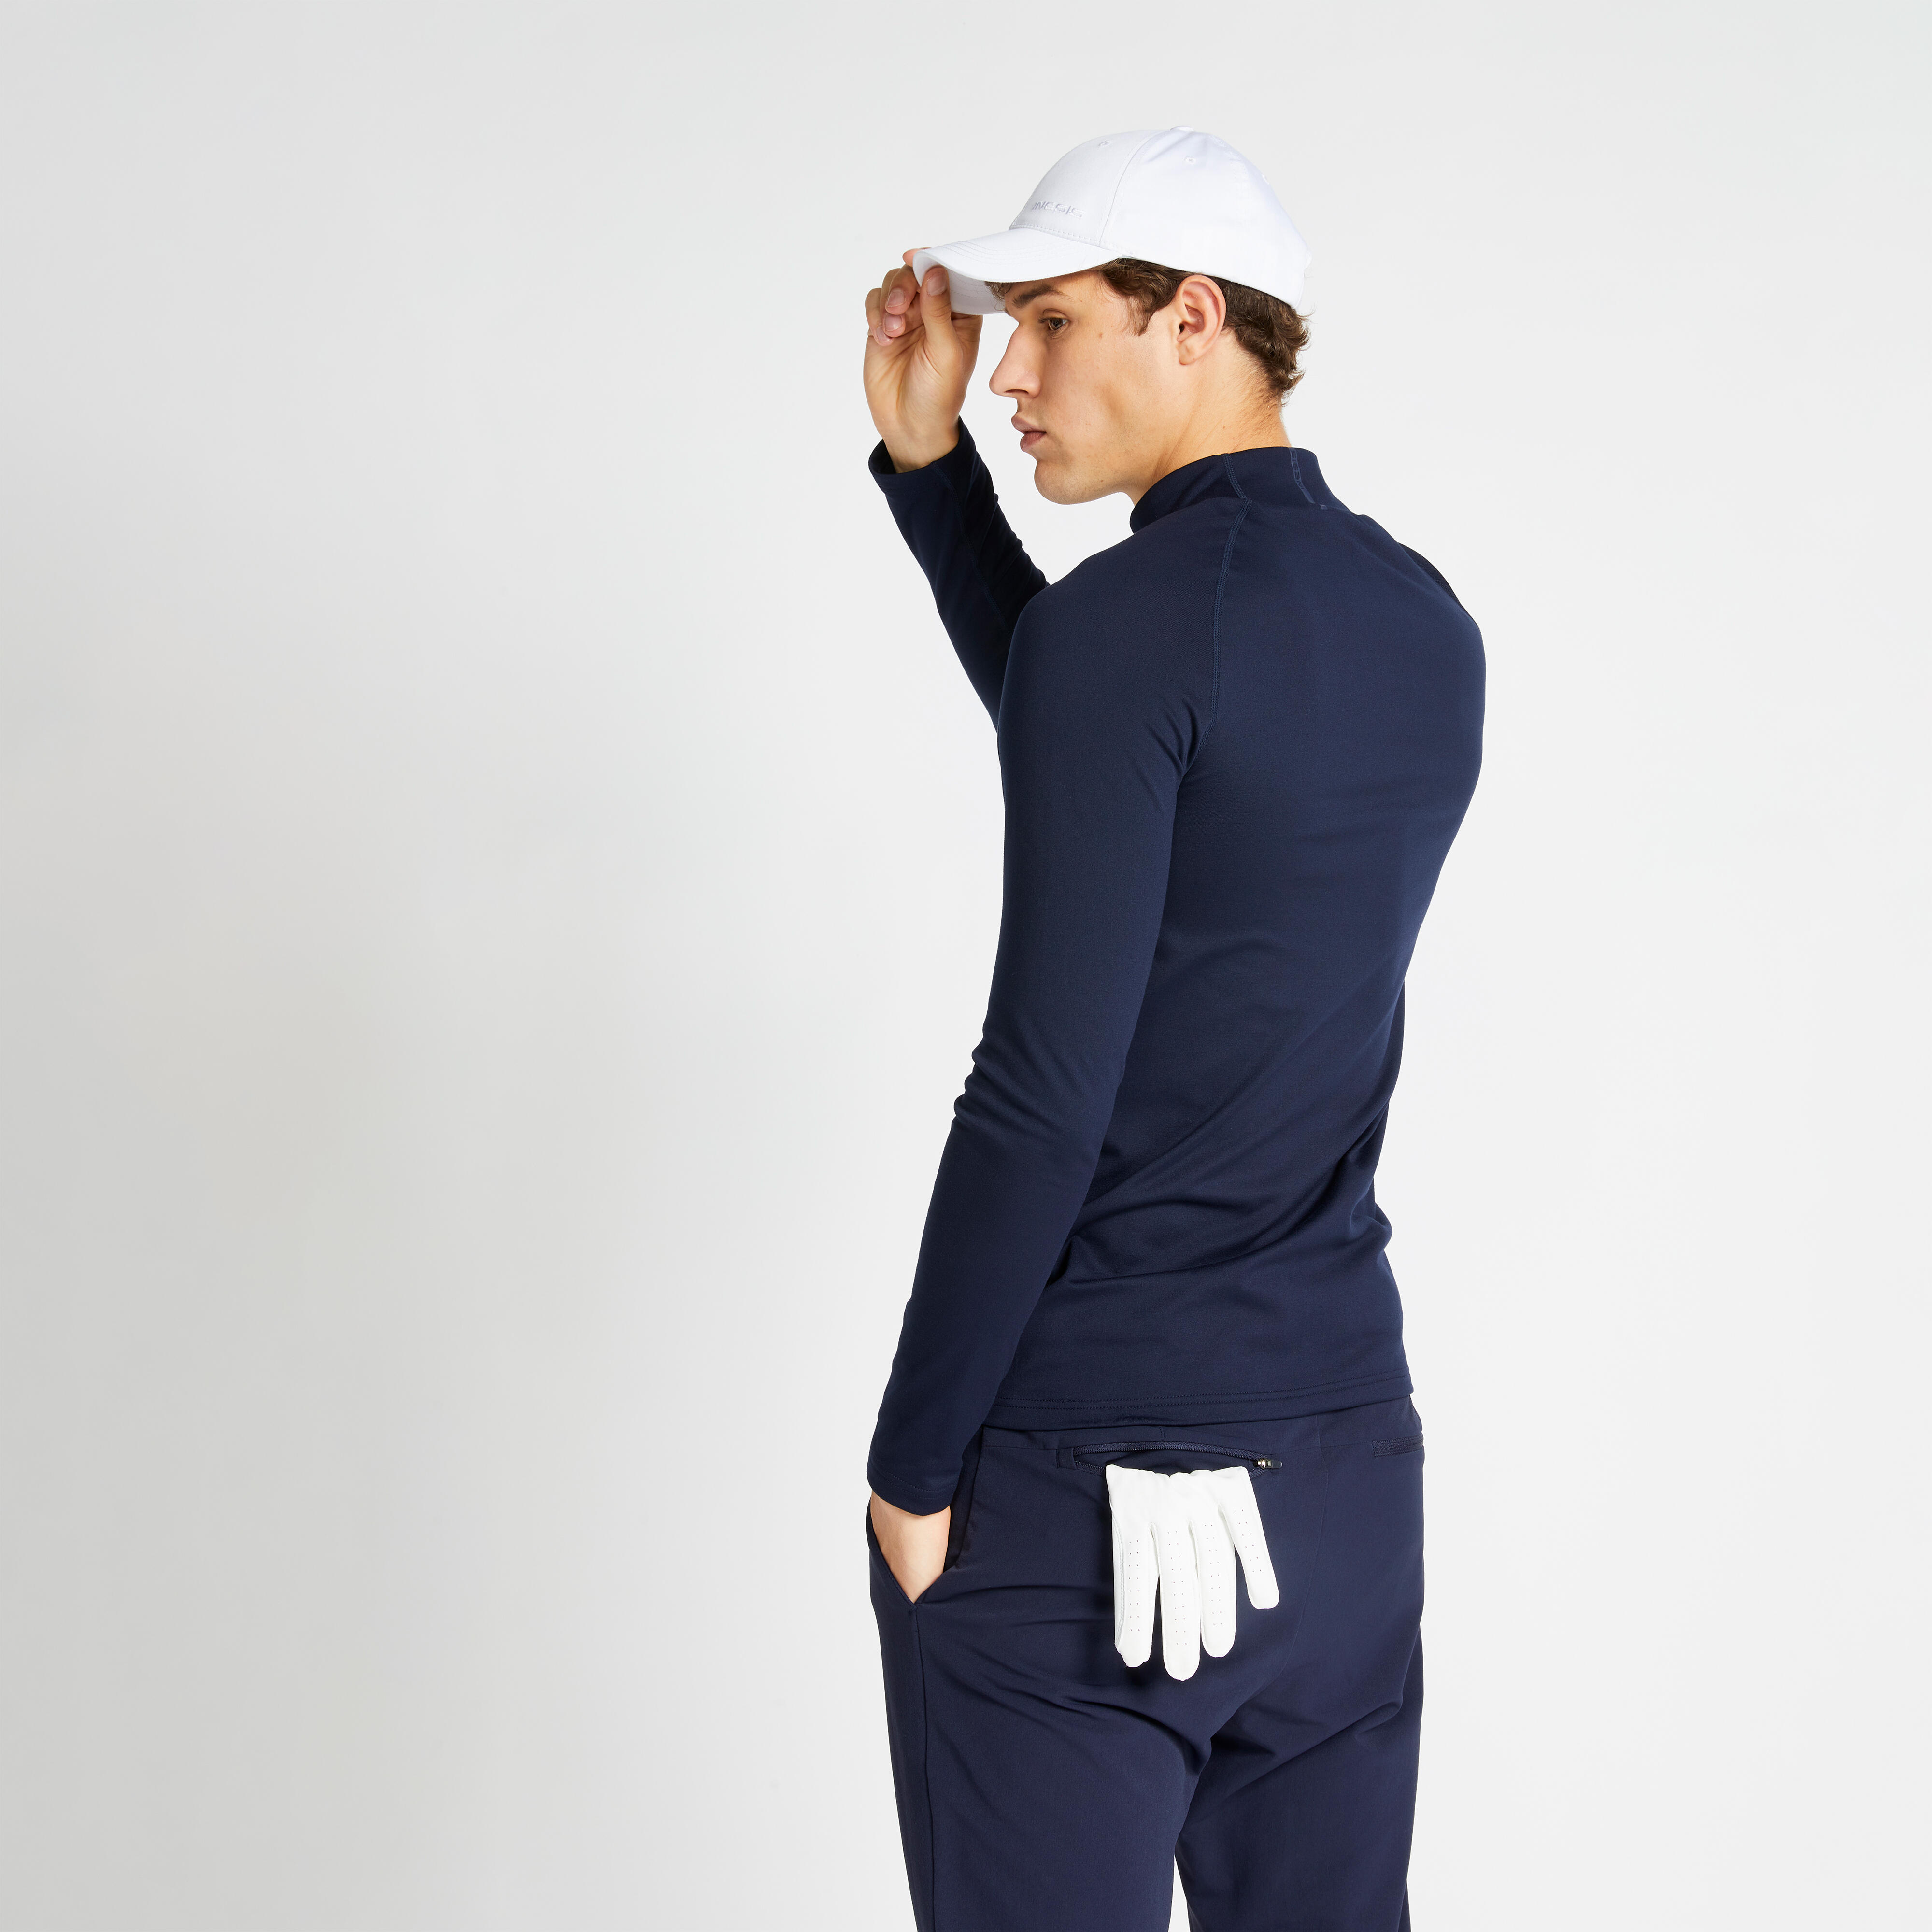 sous pull golf thermique homme - cw500 bleu marine - inesis